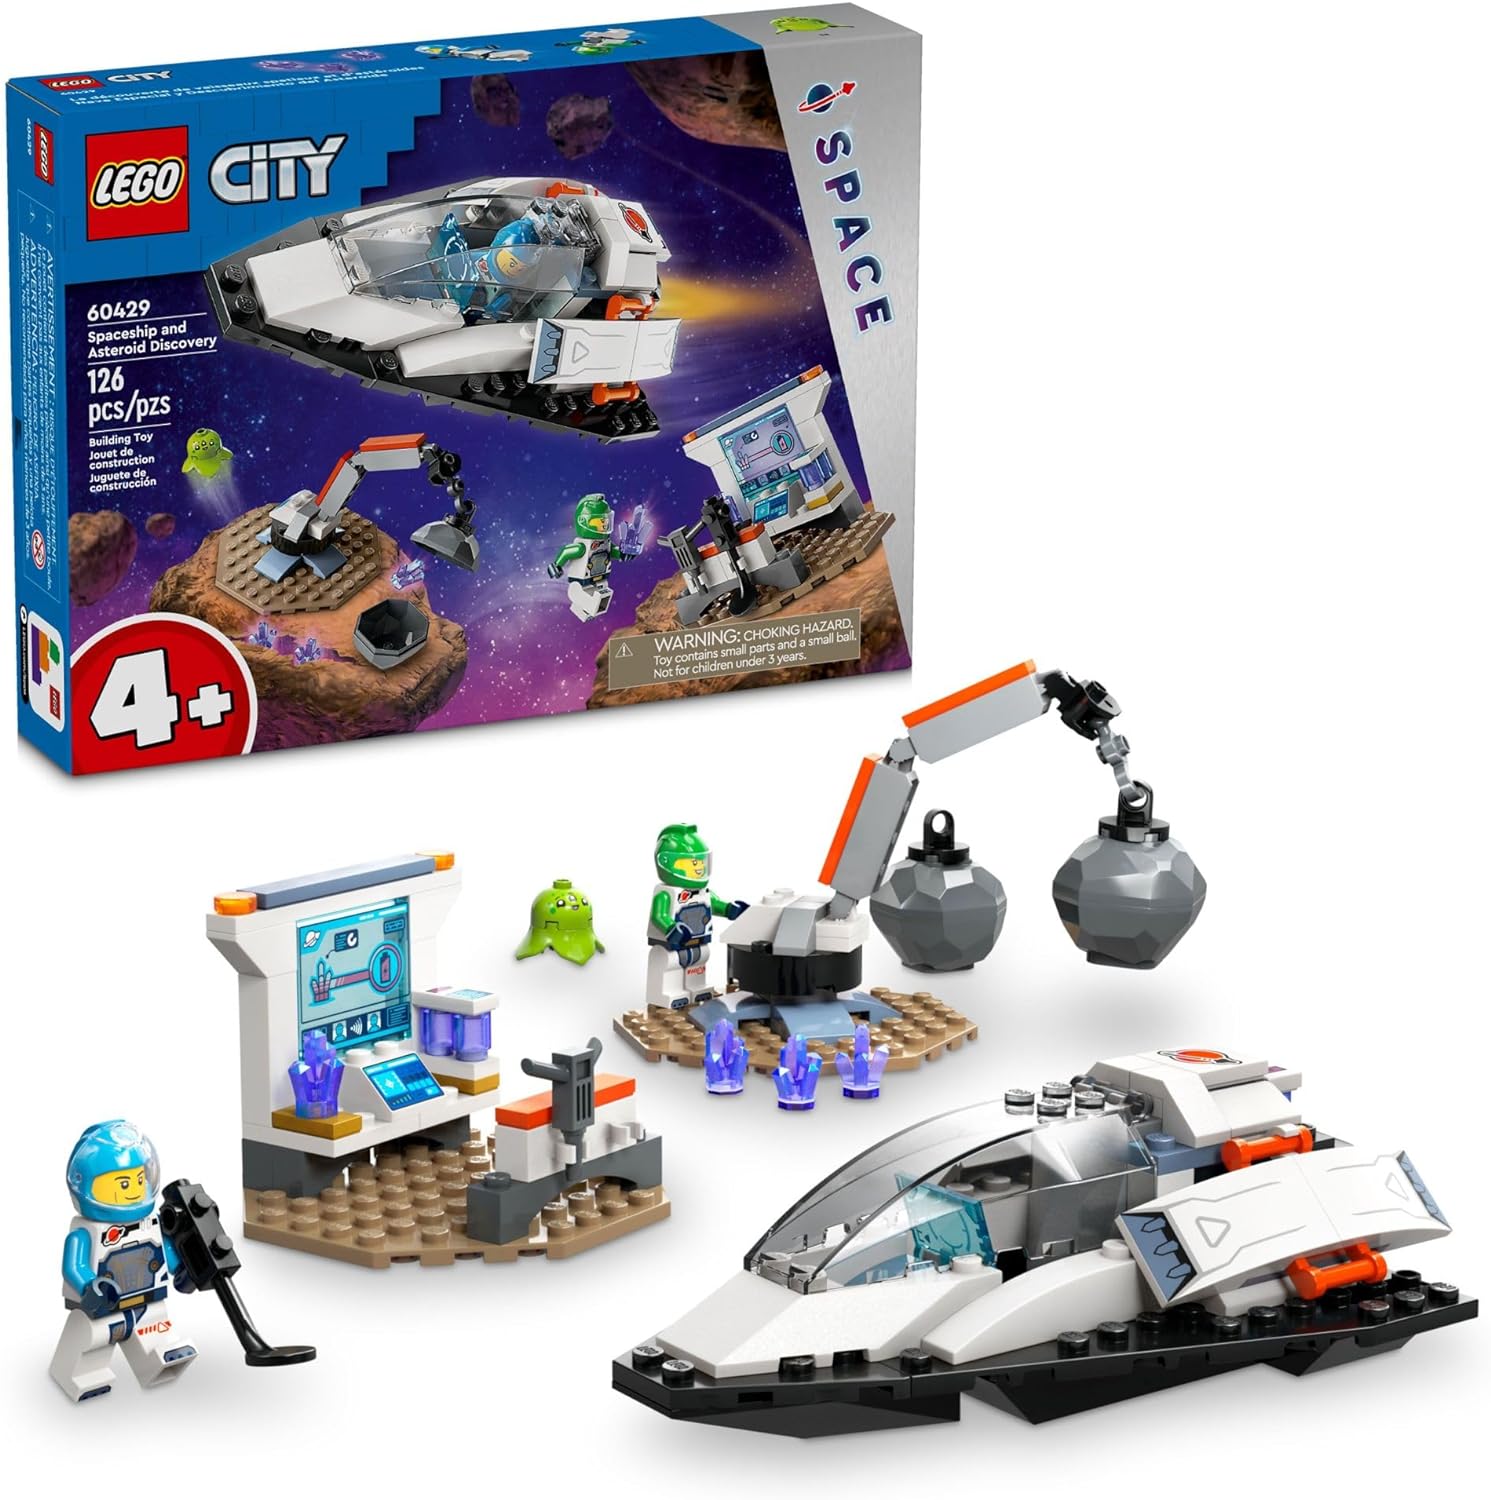 LEGO 60429 City Spaceship and Asteroid Discovery Toy Building Set, Gift for Kids Ages 4 Years Old and Up who Love Pretend Play, Includes 2 Space Crew Minifigures, Alien, Crystals, and Crane Toy